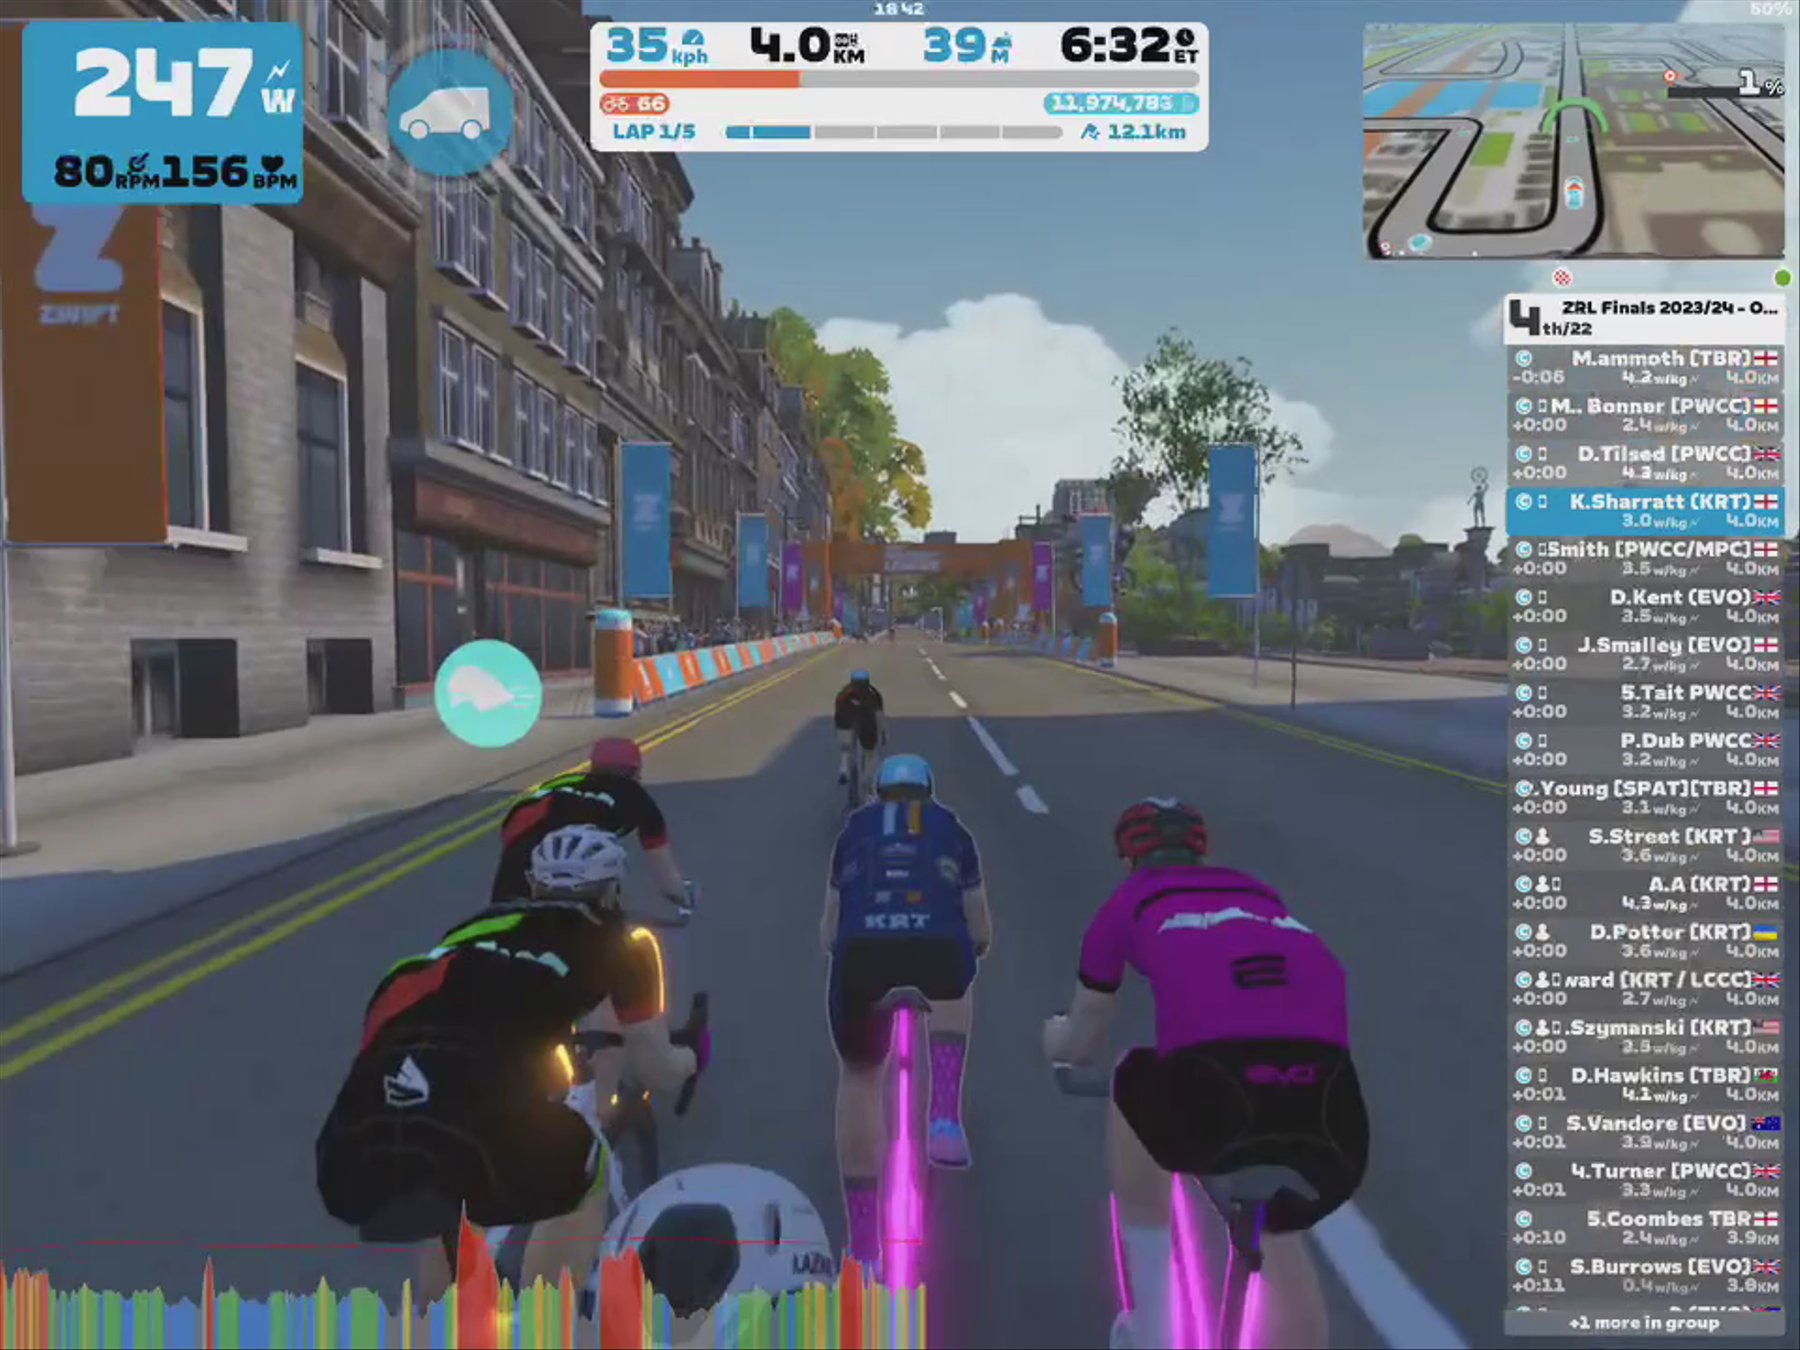 Zwift - Race: ZRL Finals 2023/24 - Open EMEAE Division 3 - Cup Final (Part2) (C) on Glasgow Reverse in Scotland